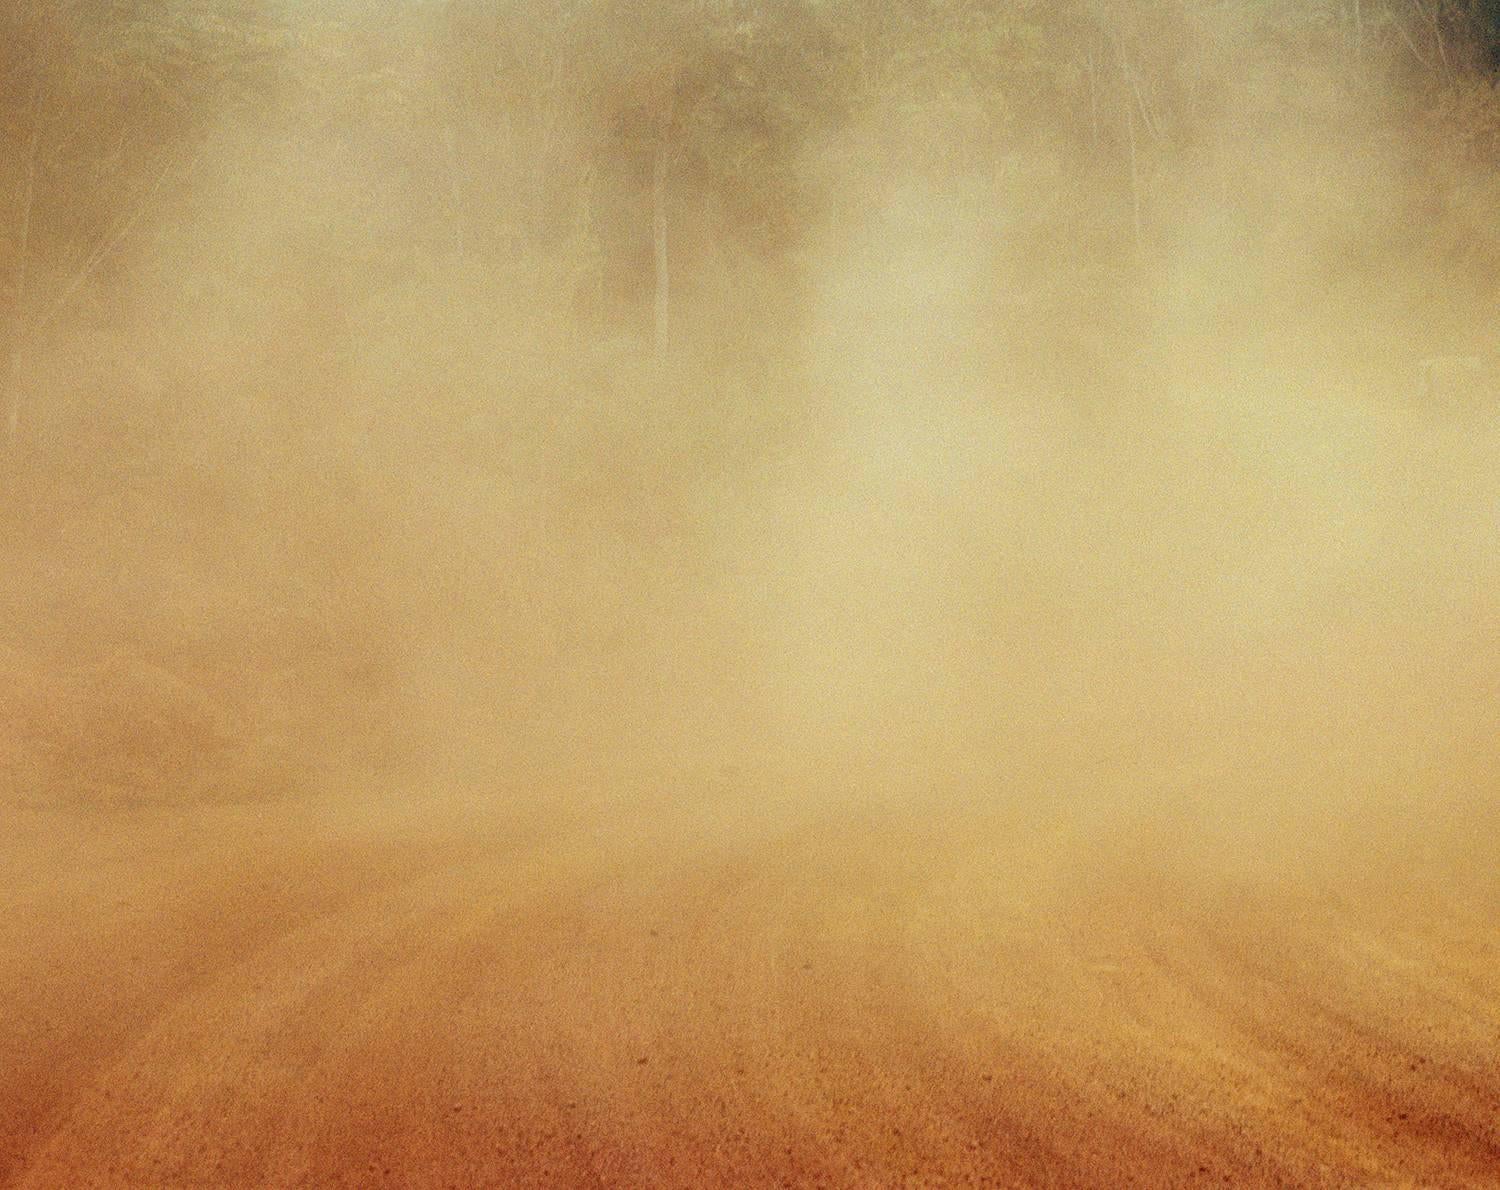 Dust #6723, 40"x50 limited edition photograph